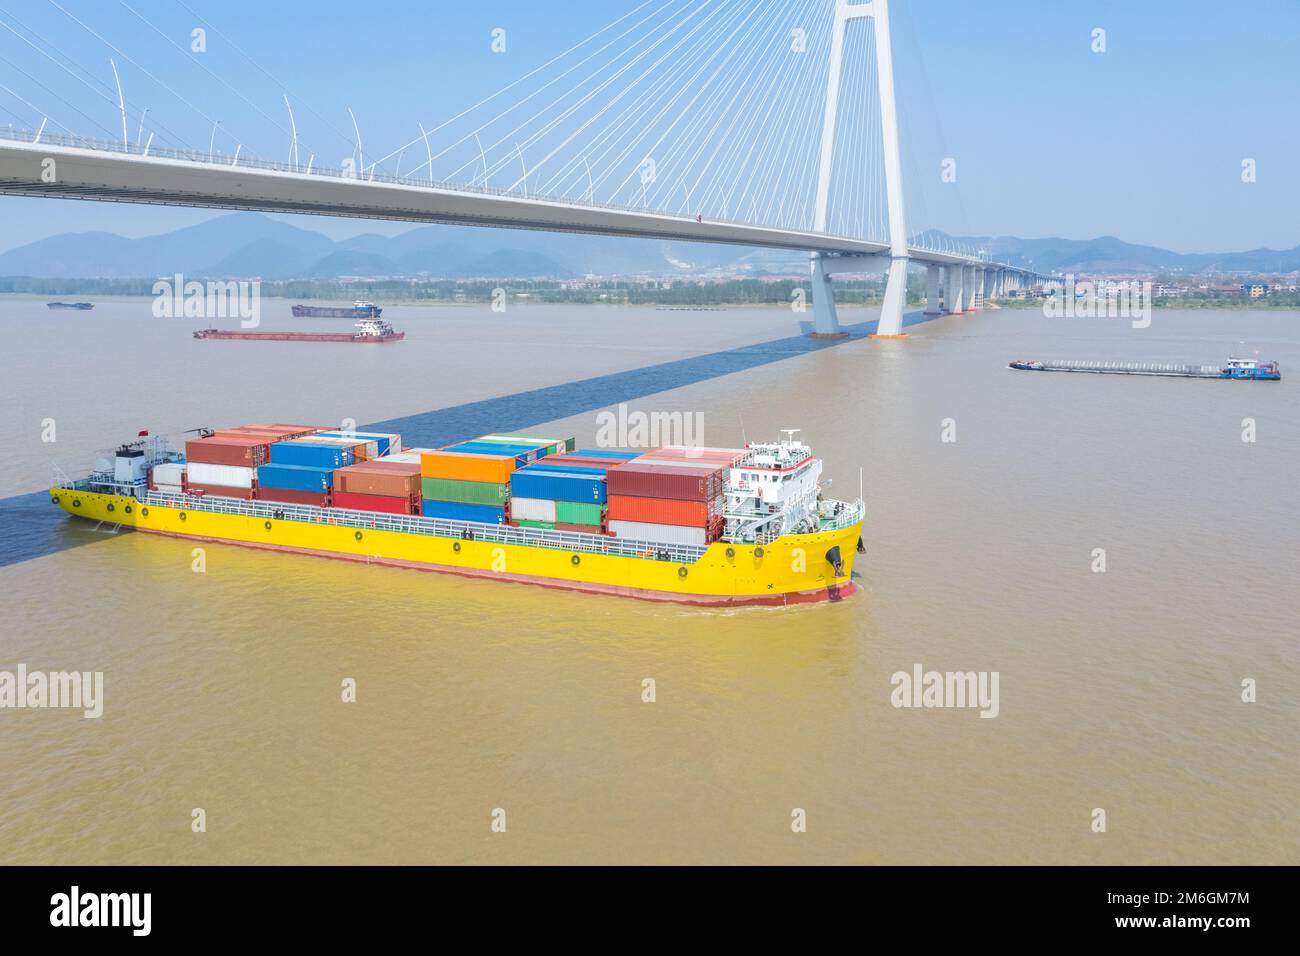 Container ship sailing on inland river under cable-stayed bridge Stock Photo